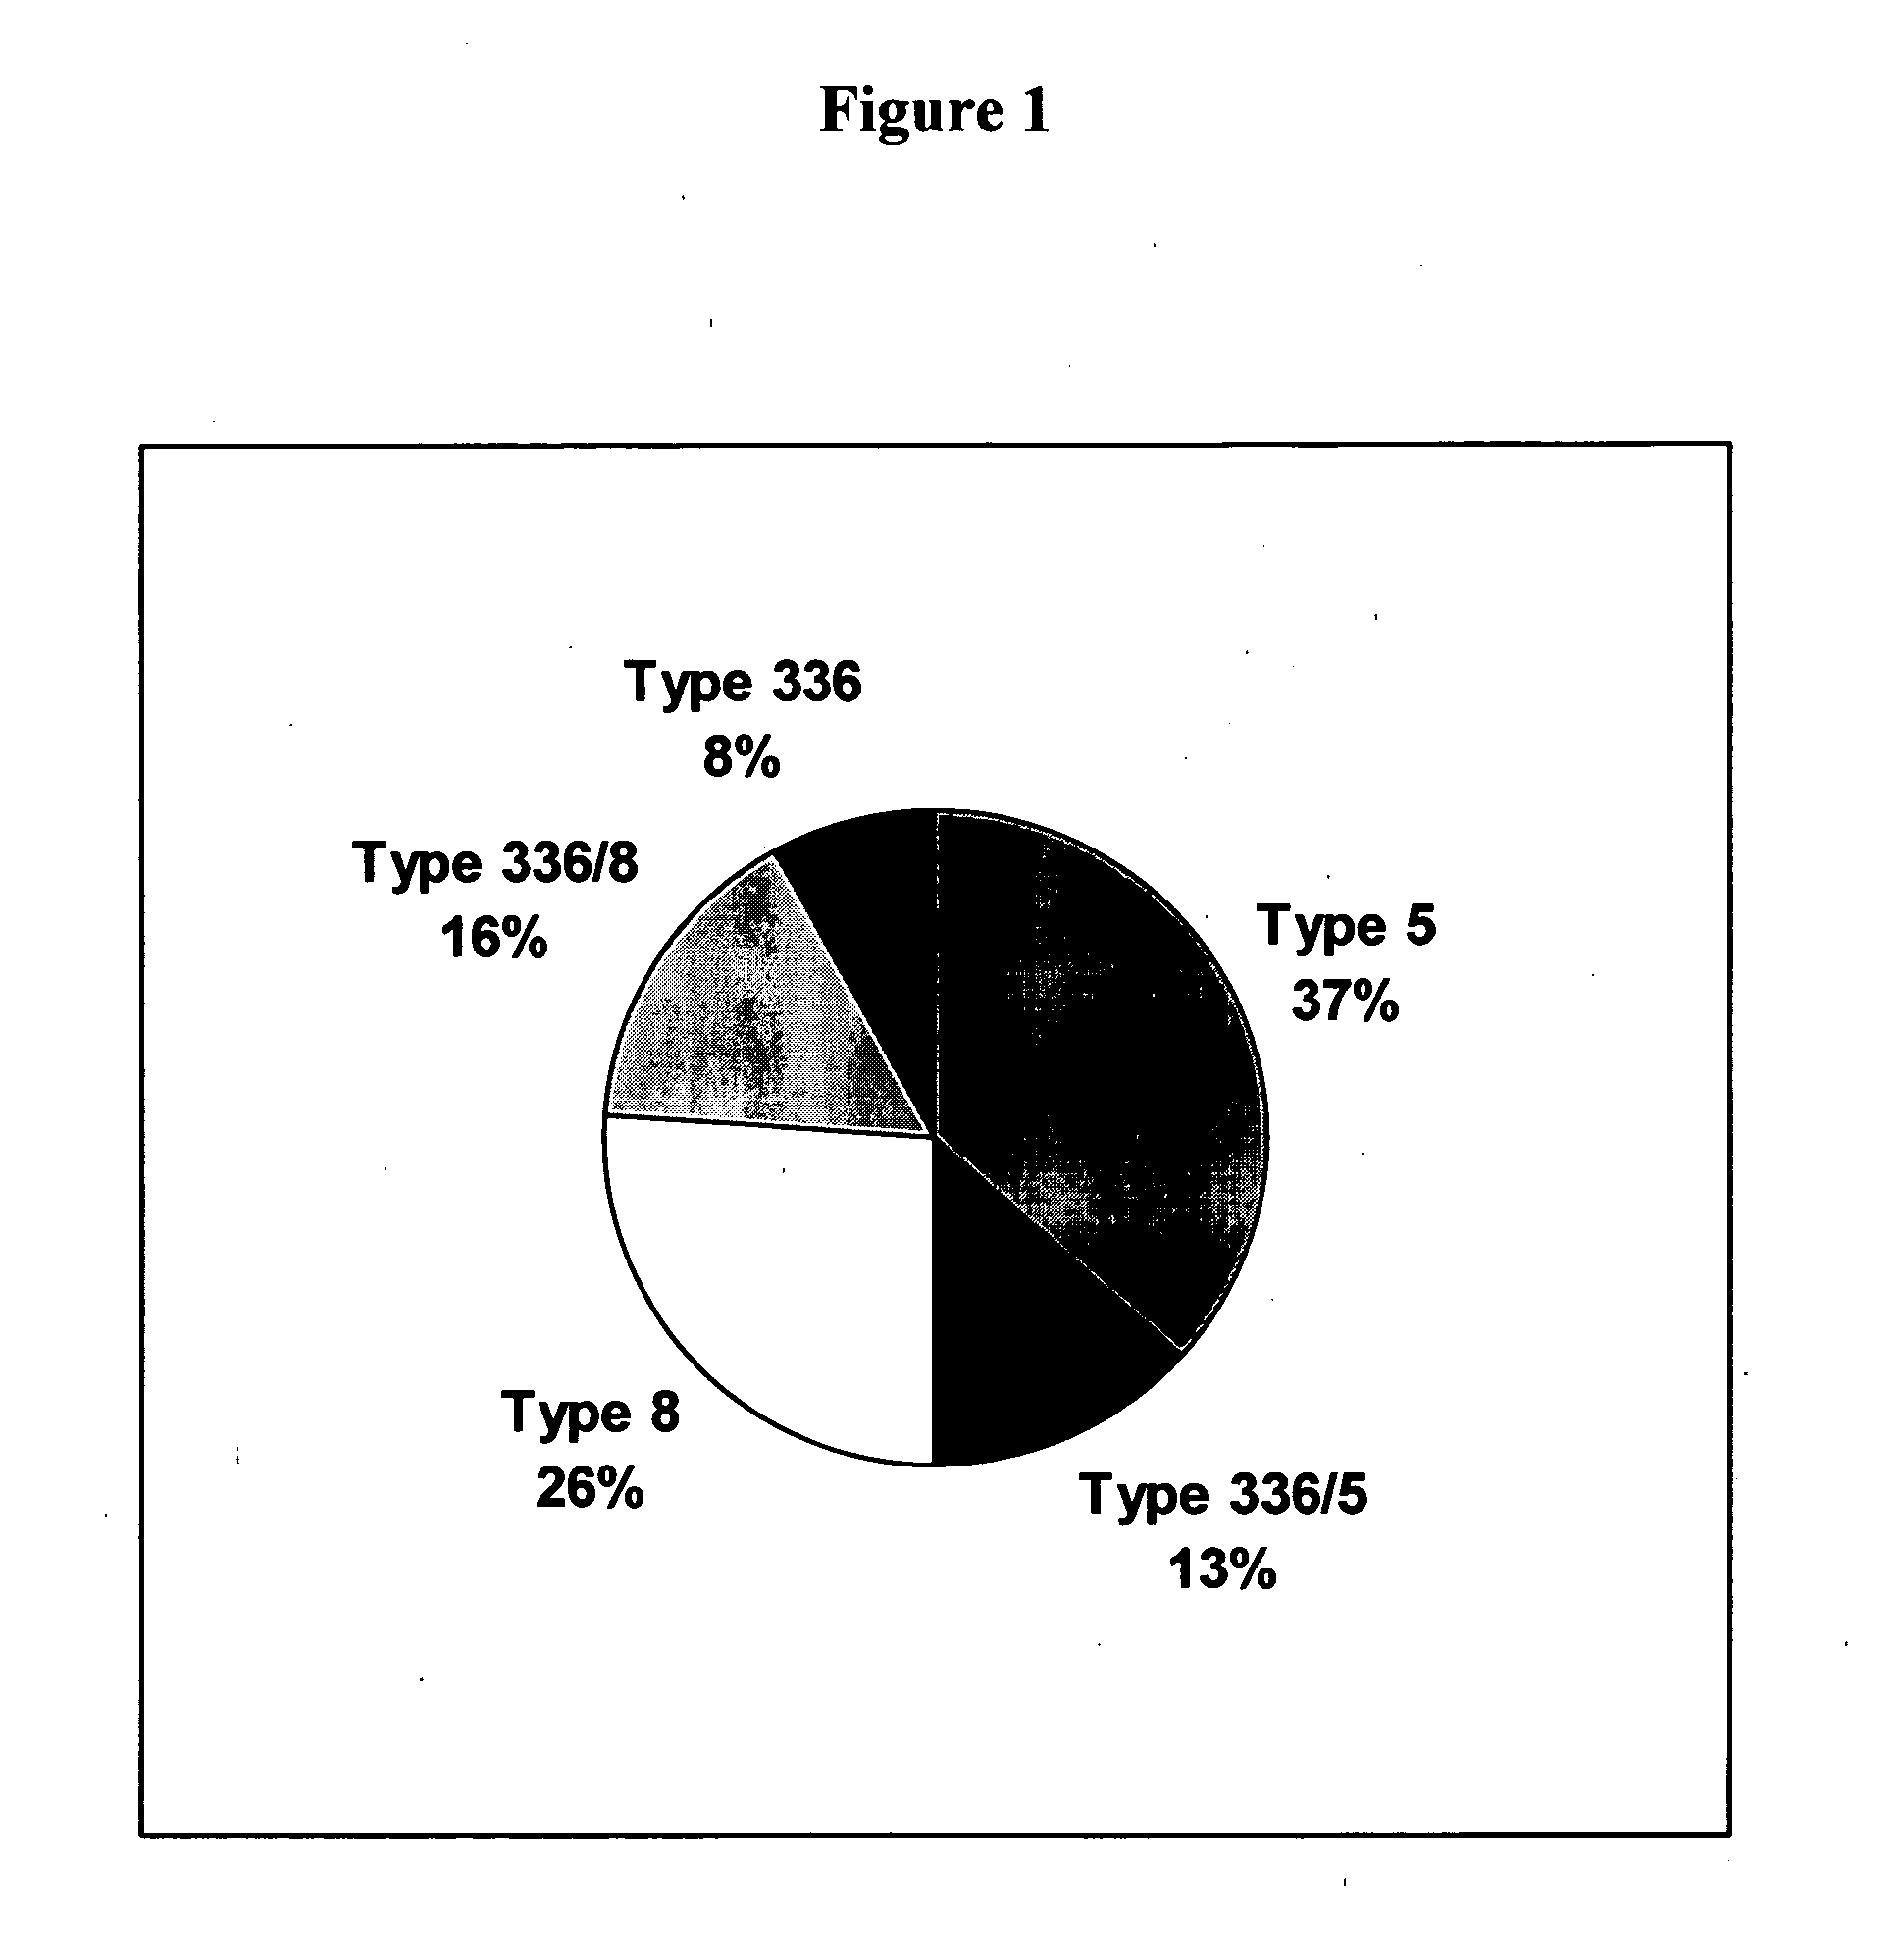 Method of protecting against staphylococcal infection